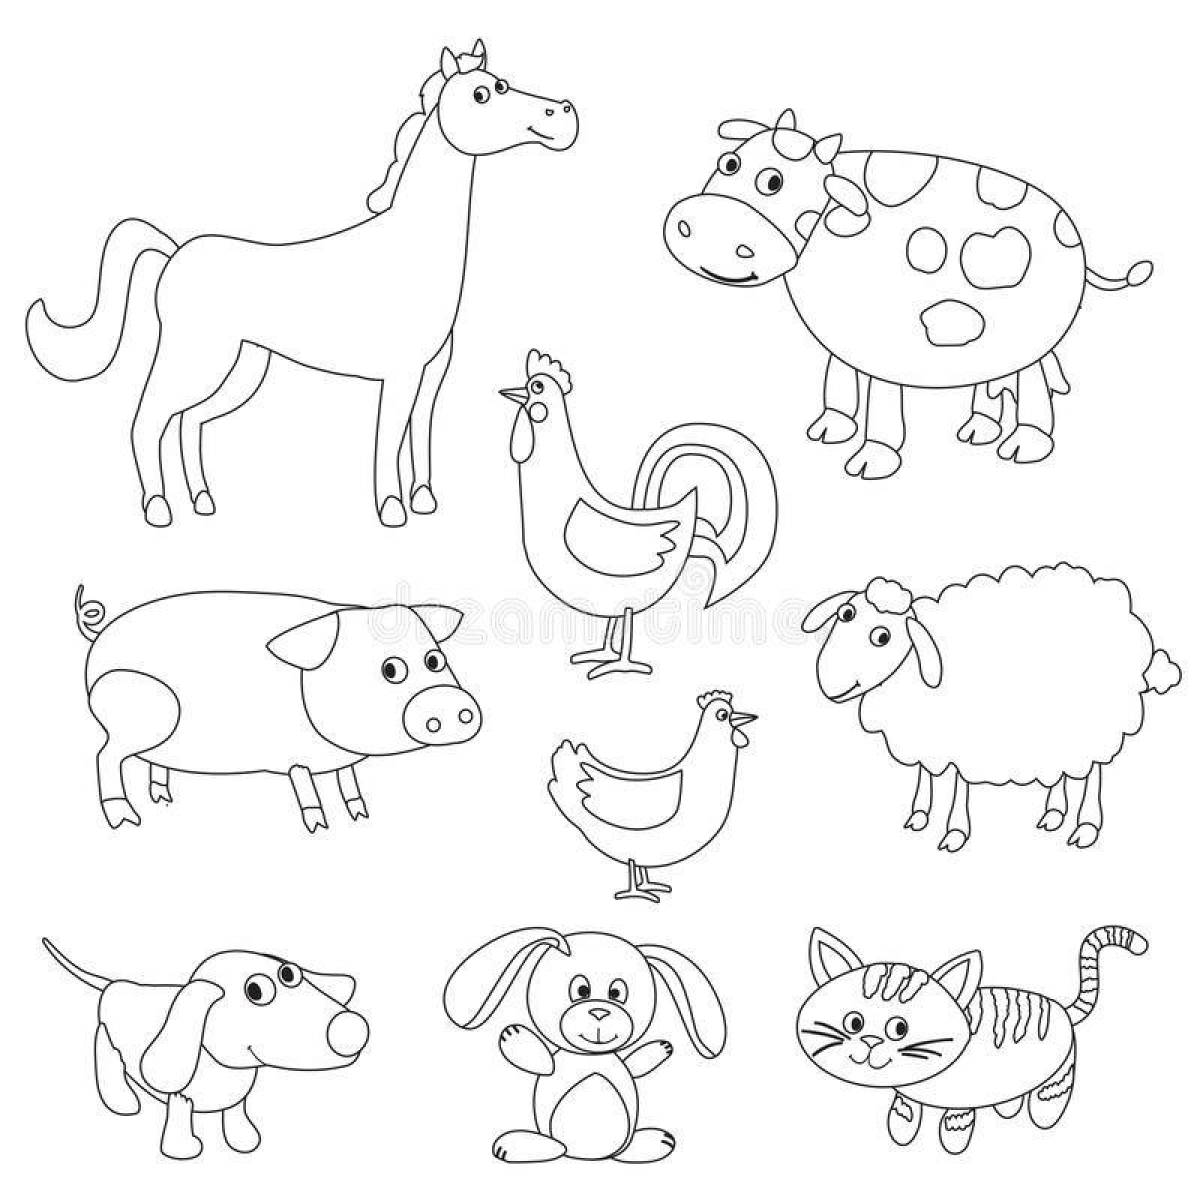 Adorable pet coloring book for 4-5 year olds